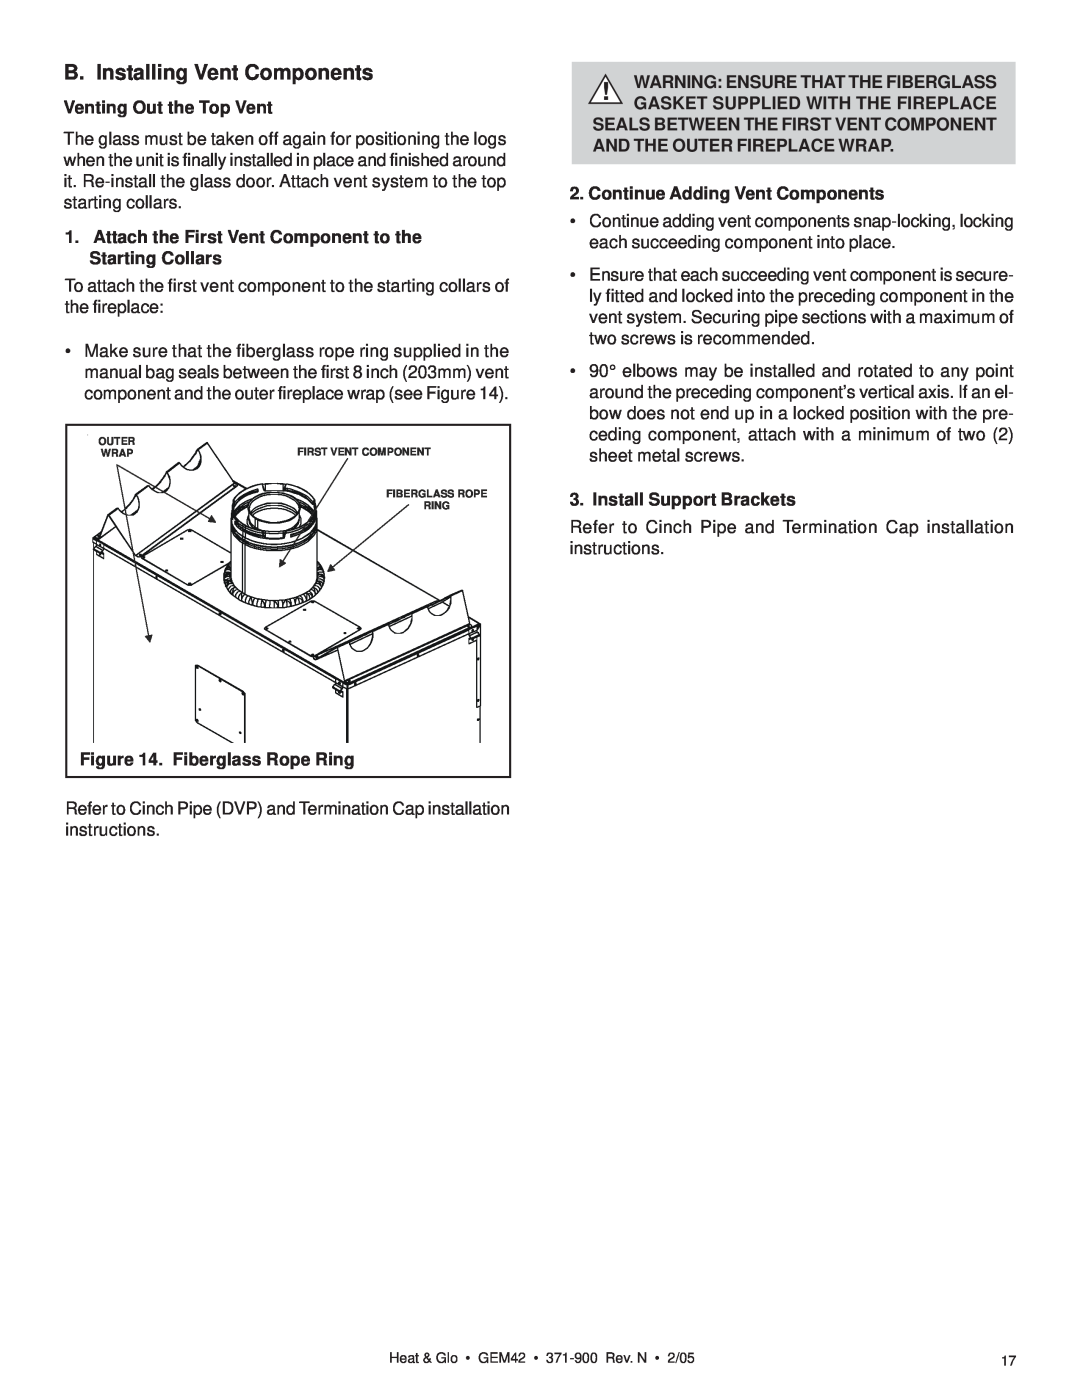 Heat & Glo LifeStyle GEM42 manual B. Installing Vent Components, Venting Out the Top Vent, Fiberglass Rope Ring 